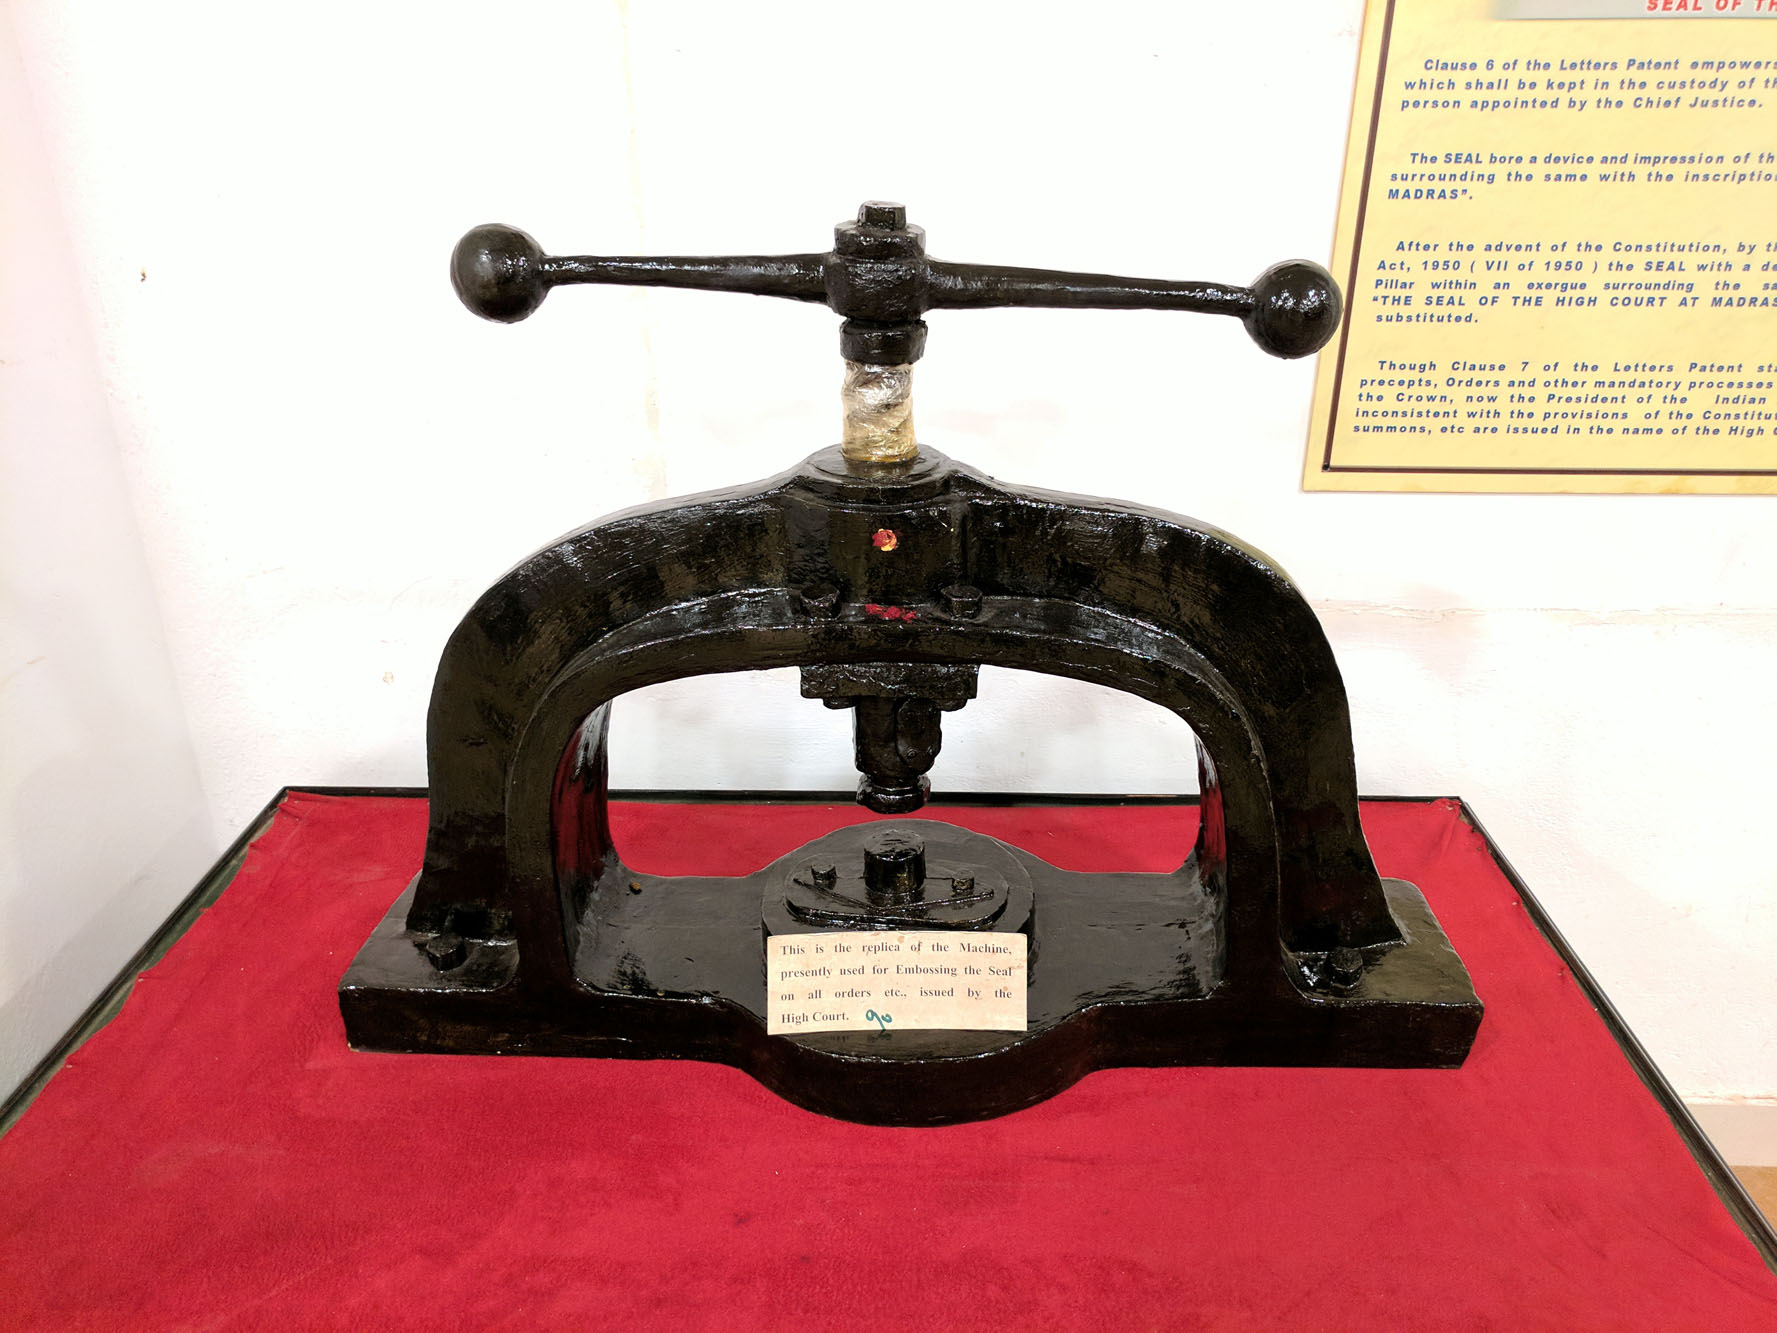 Replica of the machine, used for embossing the seal on all orders issued by the High Court